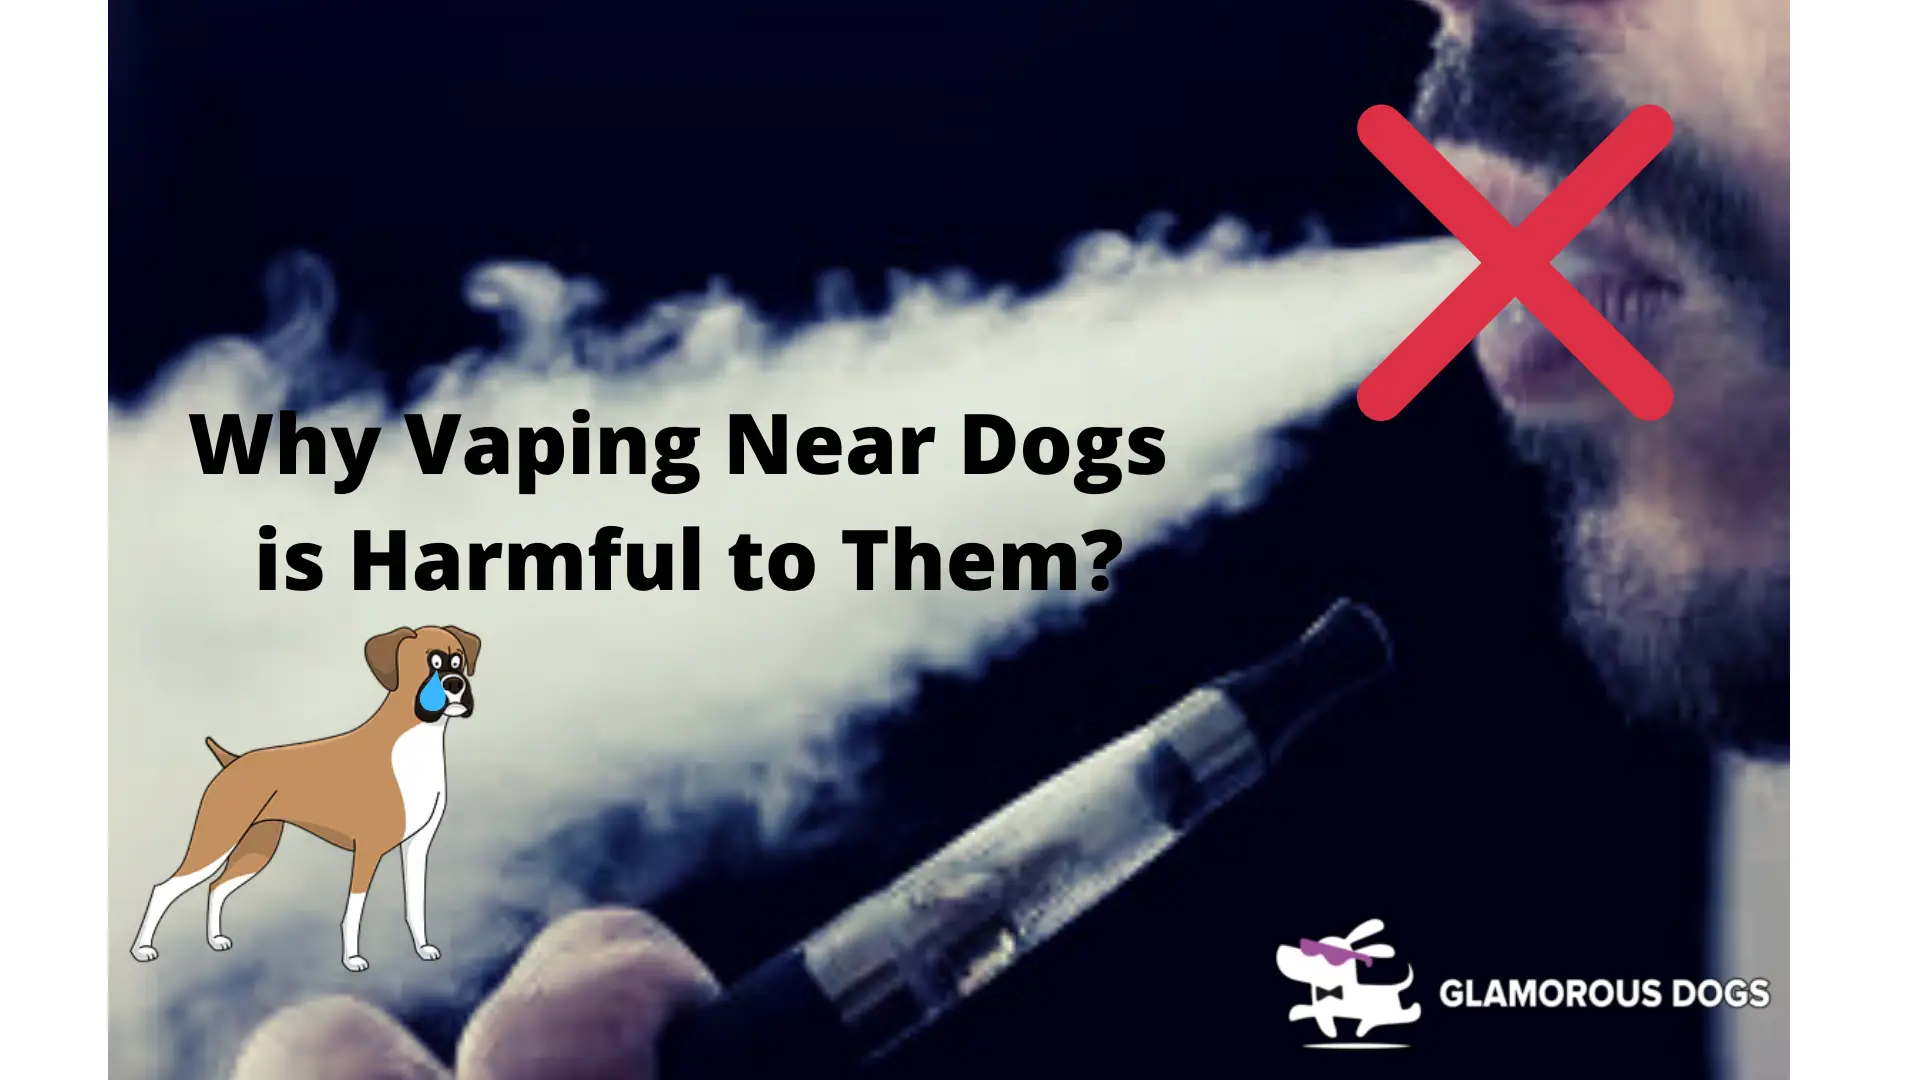 Why Vaping Near Dogs is Harmful to Them